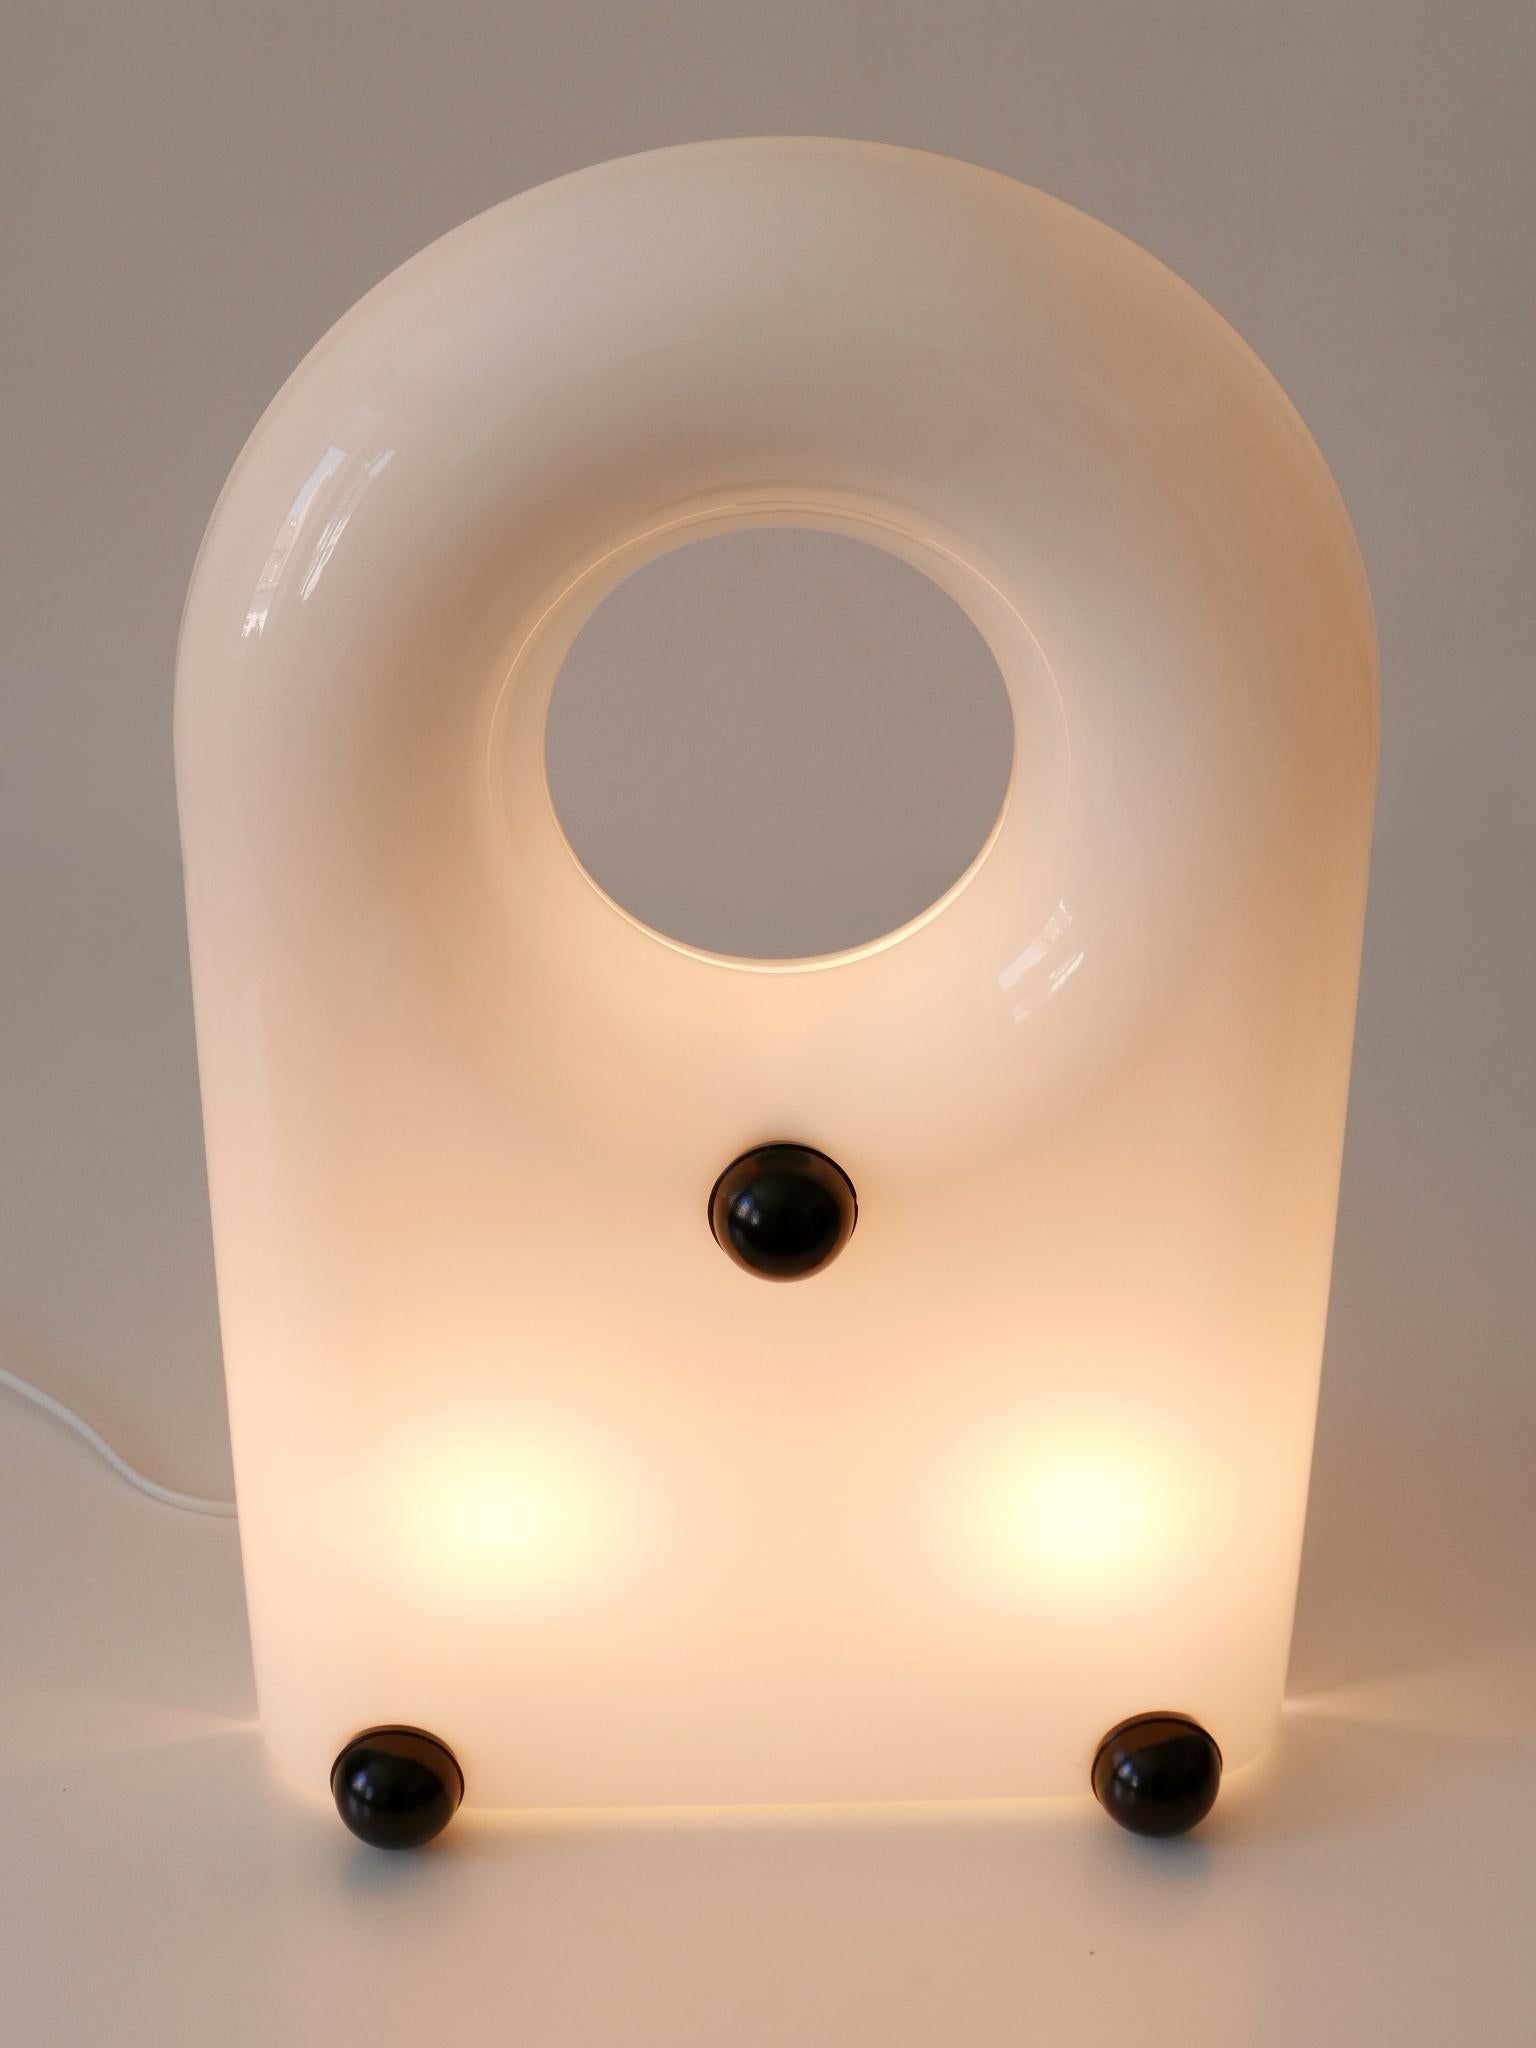 Extremely Rare Lucite Table Lamp or Floor Light by Elio Martinelli 1969 Italy For Sale 1